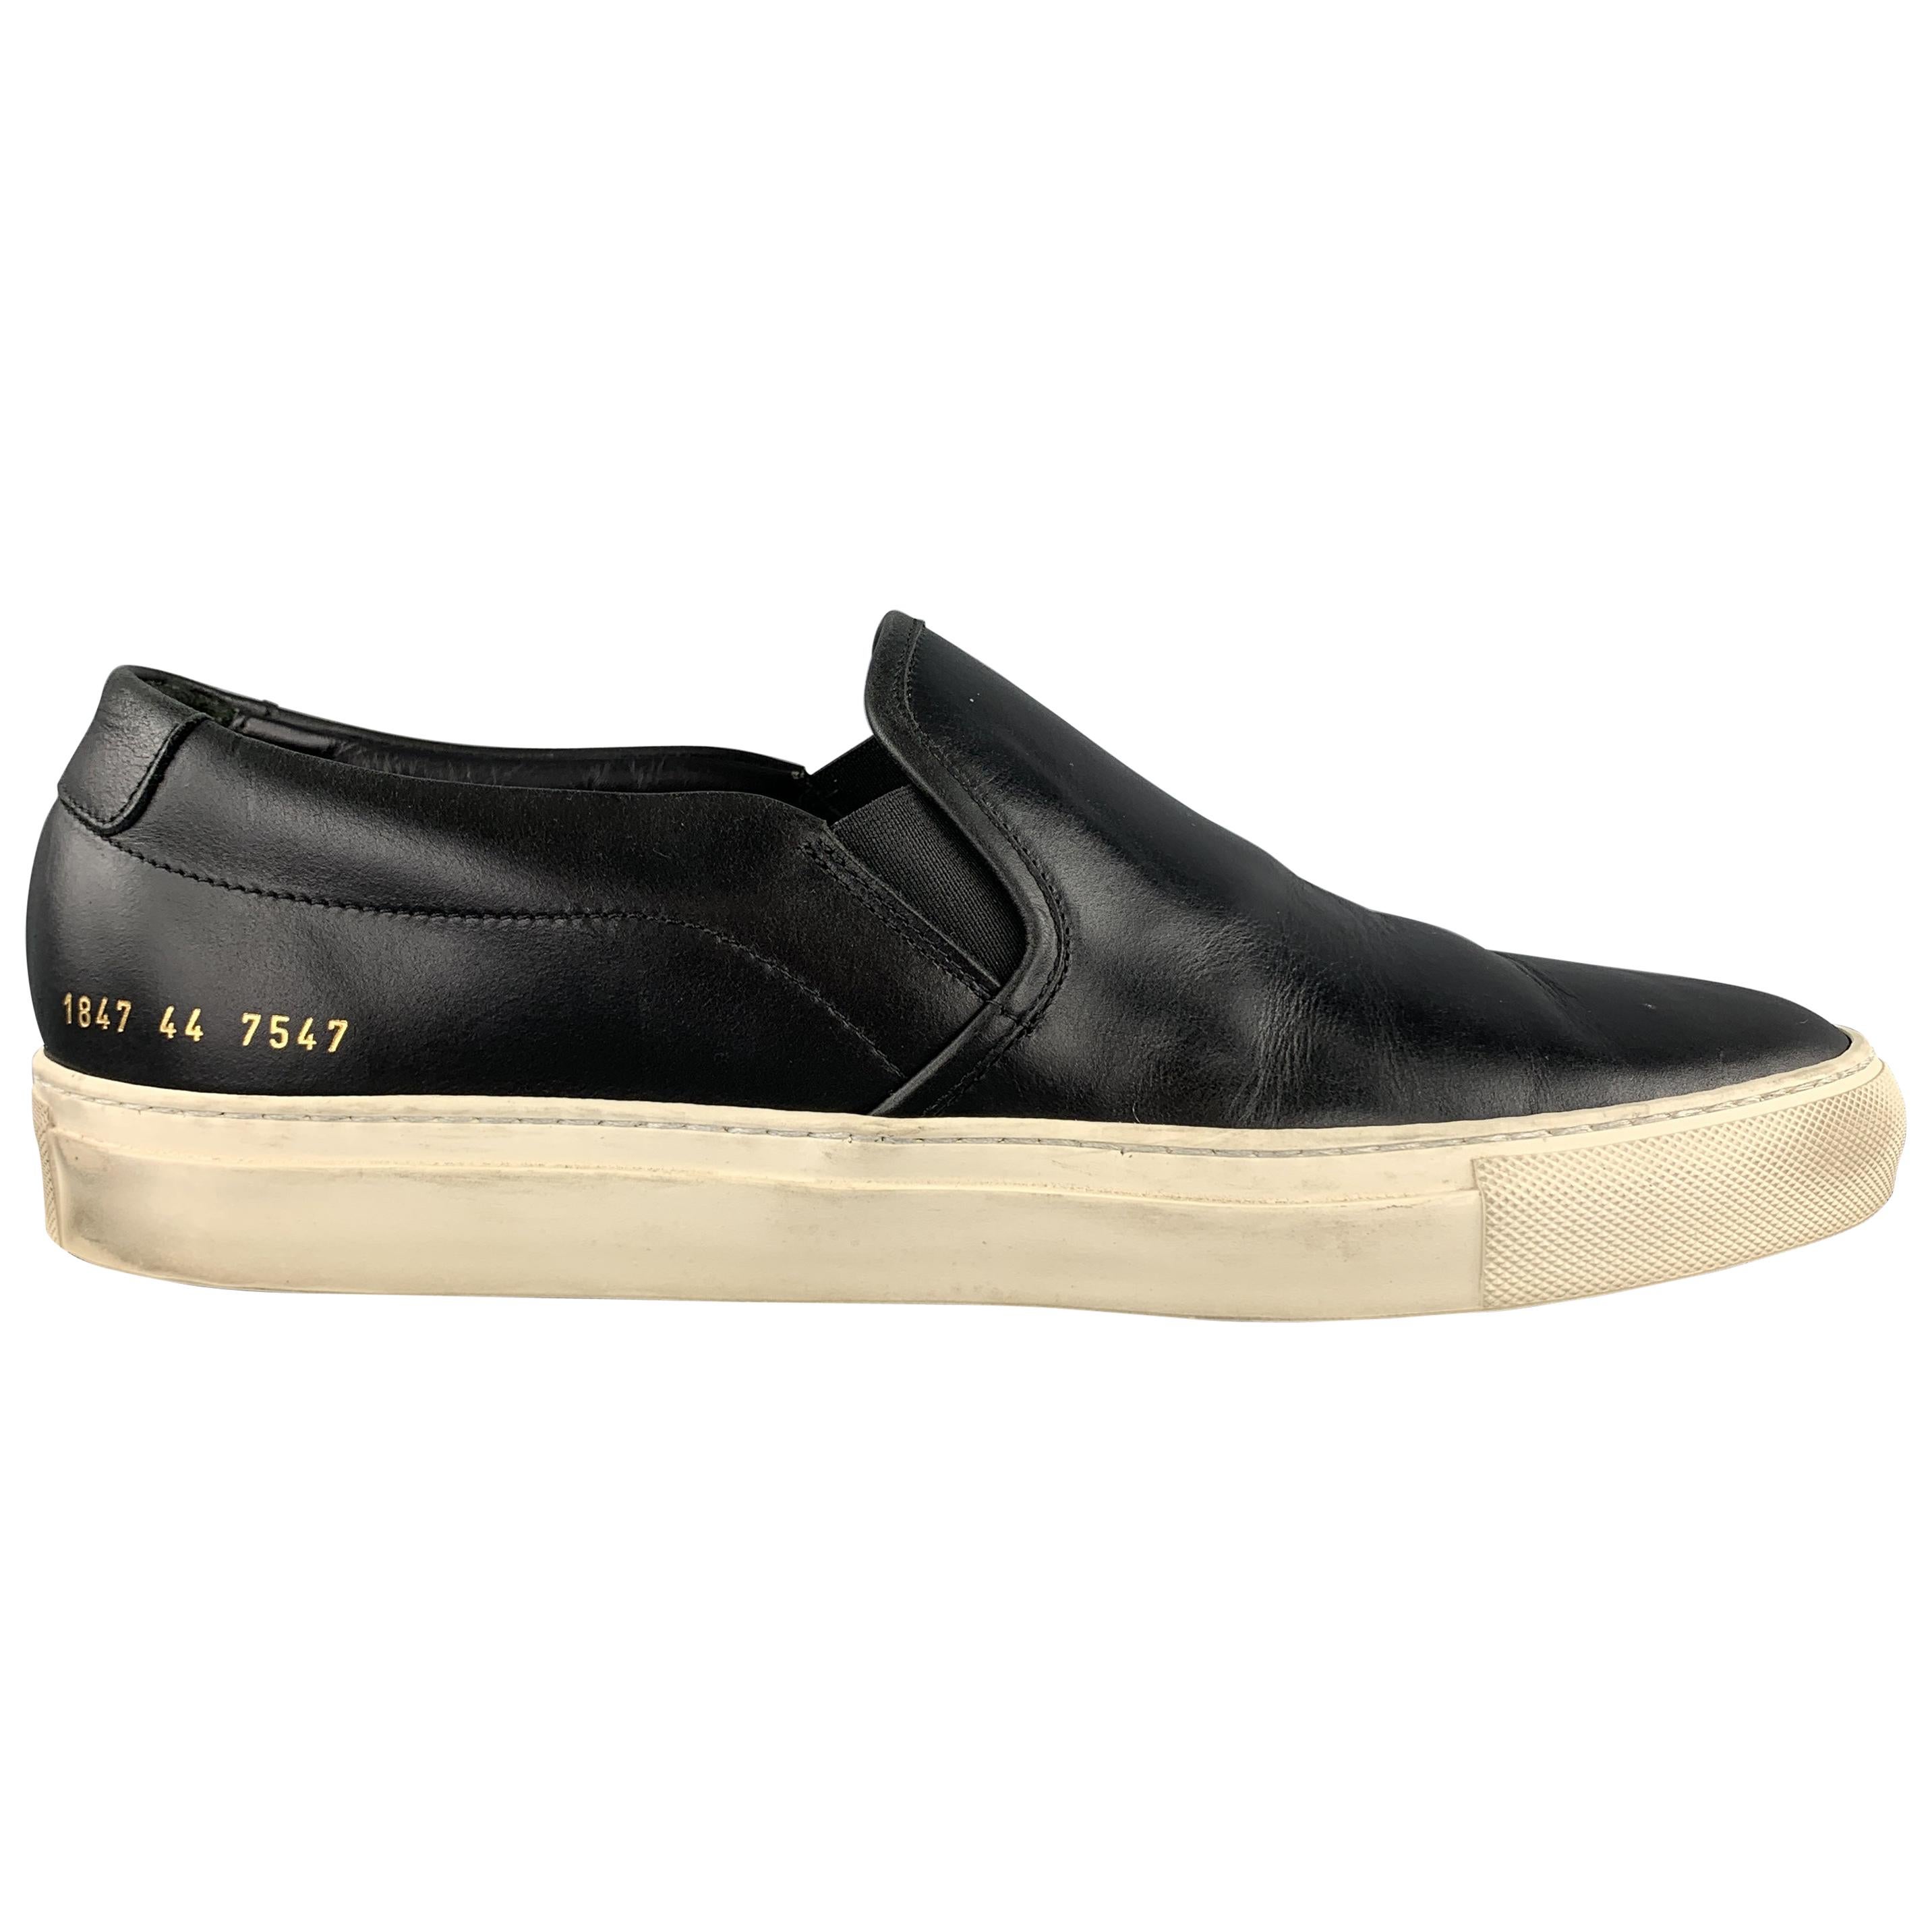 COMMON PROJECTS Size 11 Black & White Leather Slip On Sneakers